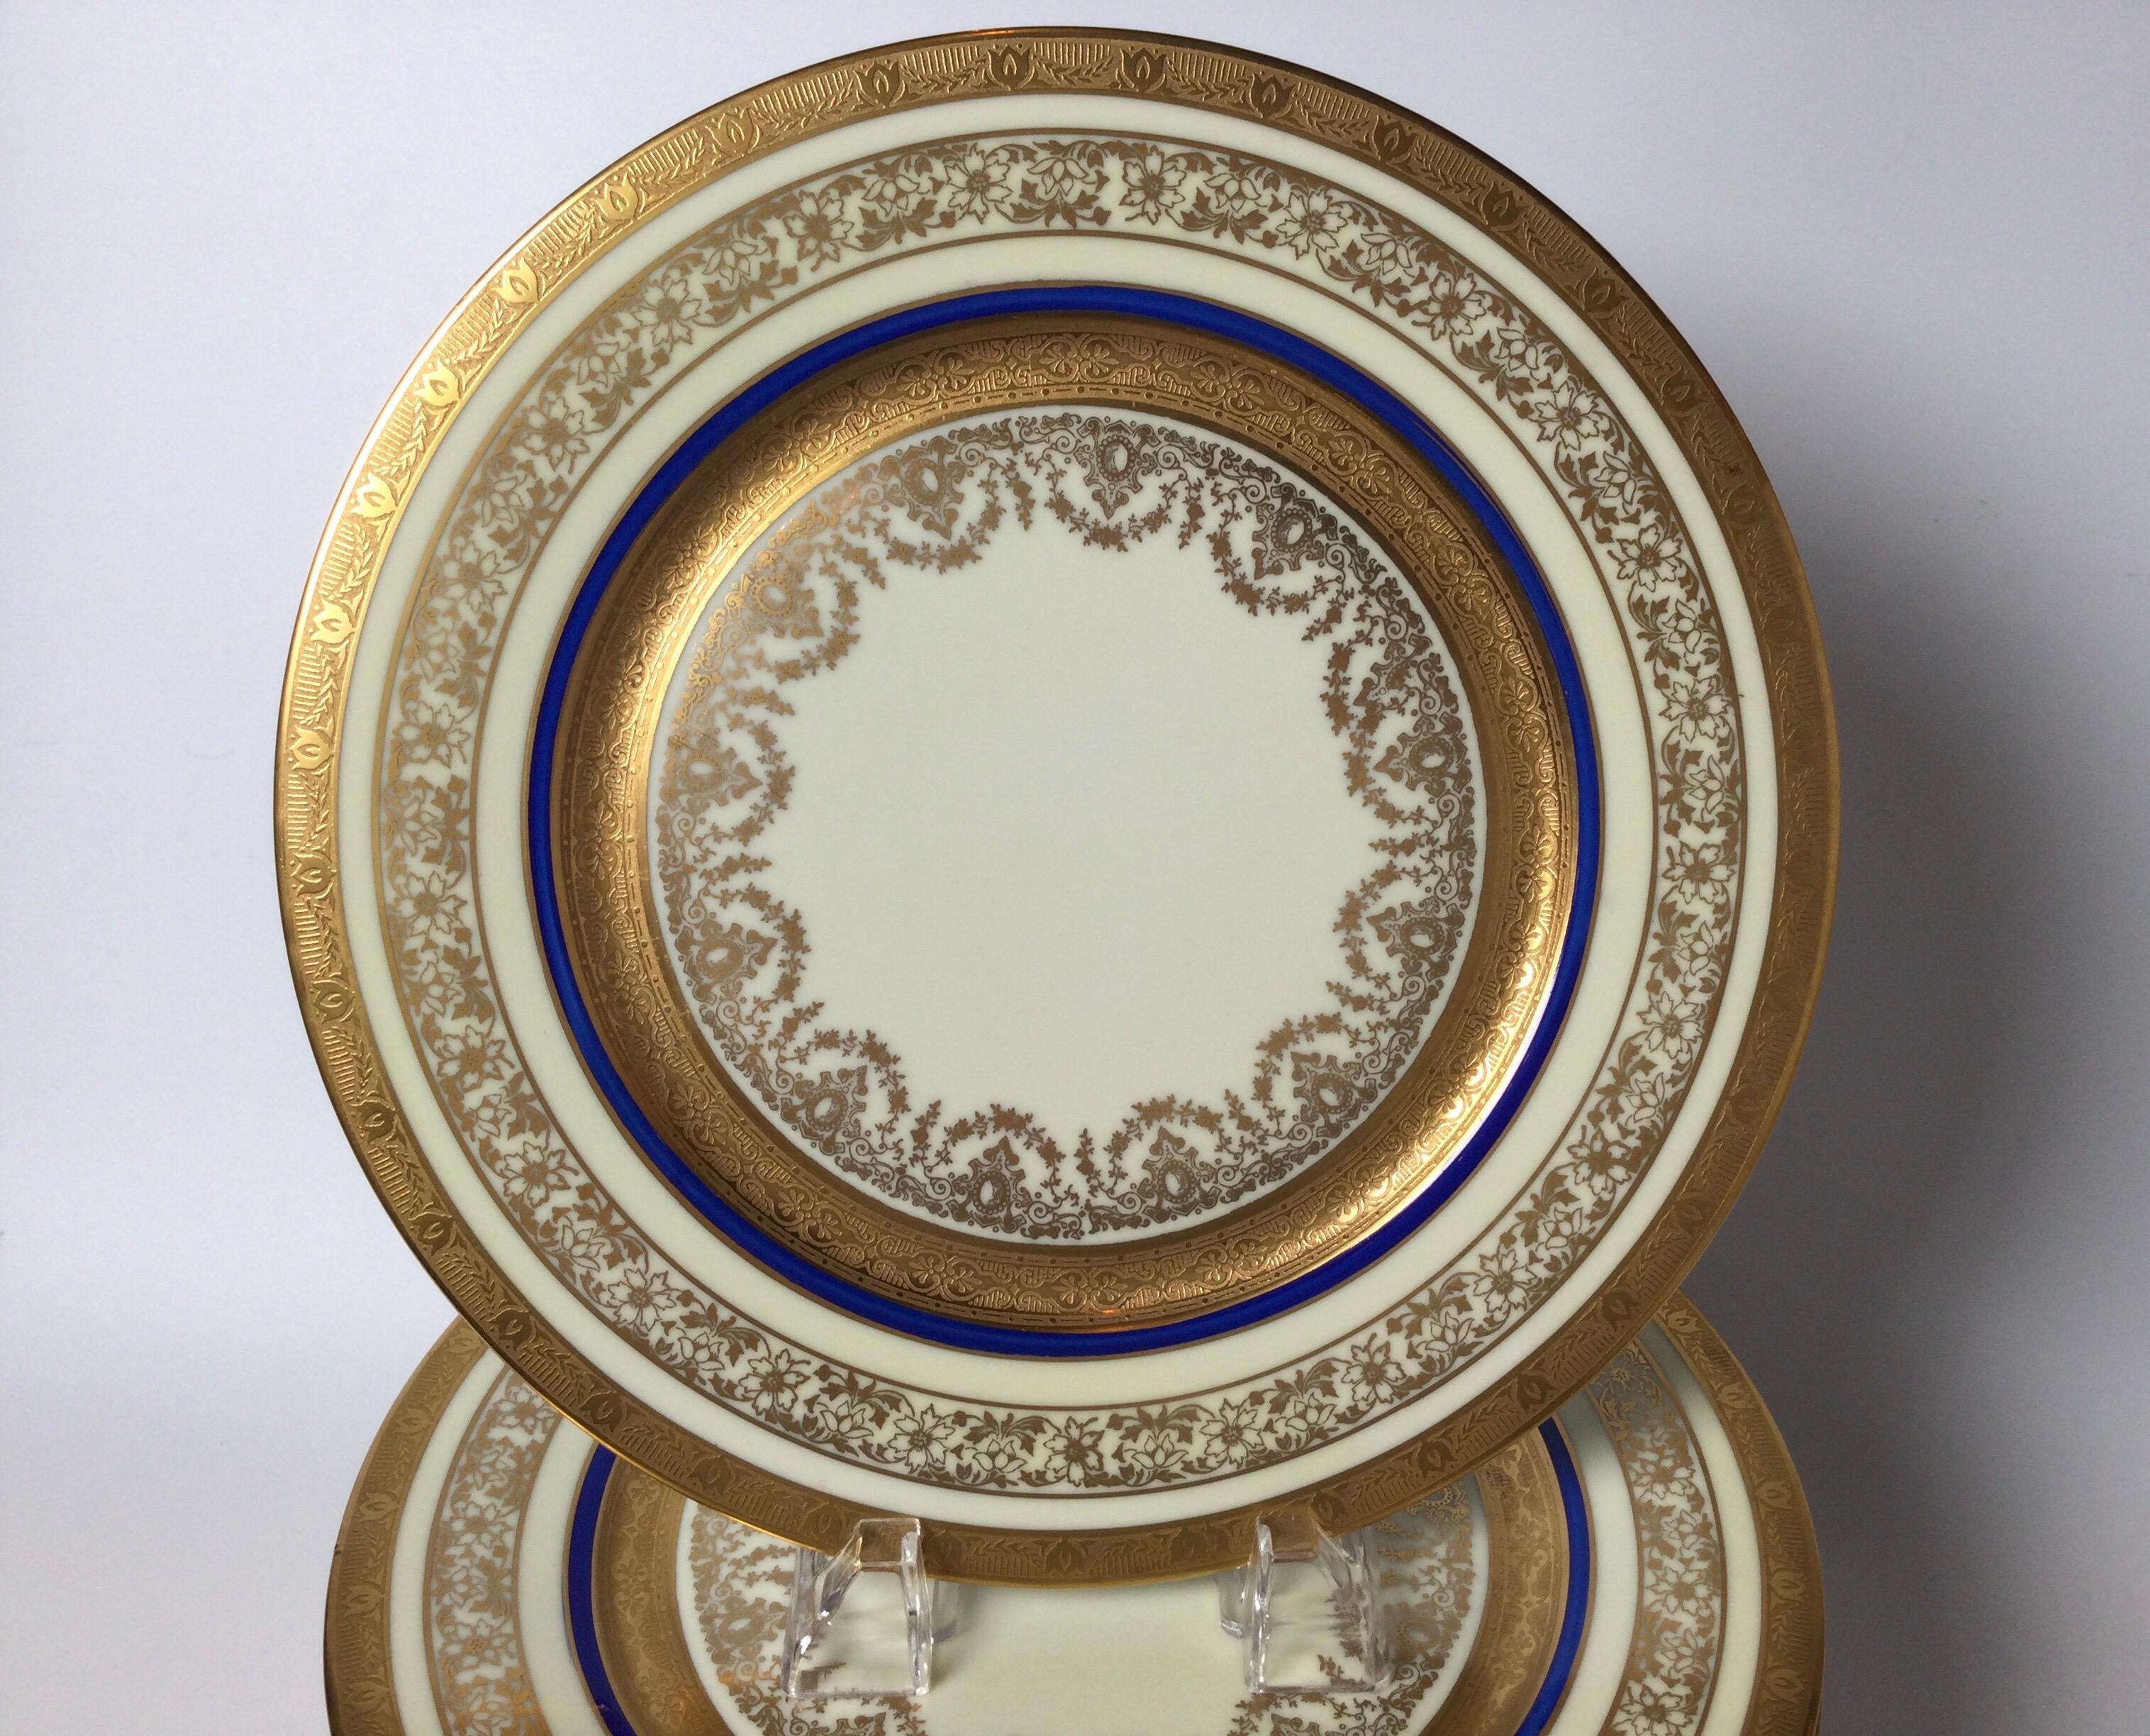 Elegant set of 12 gilt porcelain service plates with cobalt blue band. The several bands of gold with a thin cobalt band on a bone color porcelain plate. Retailed by Ovington Brothers, NYC.